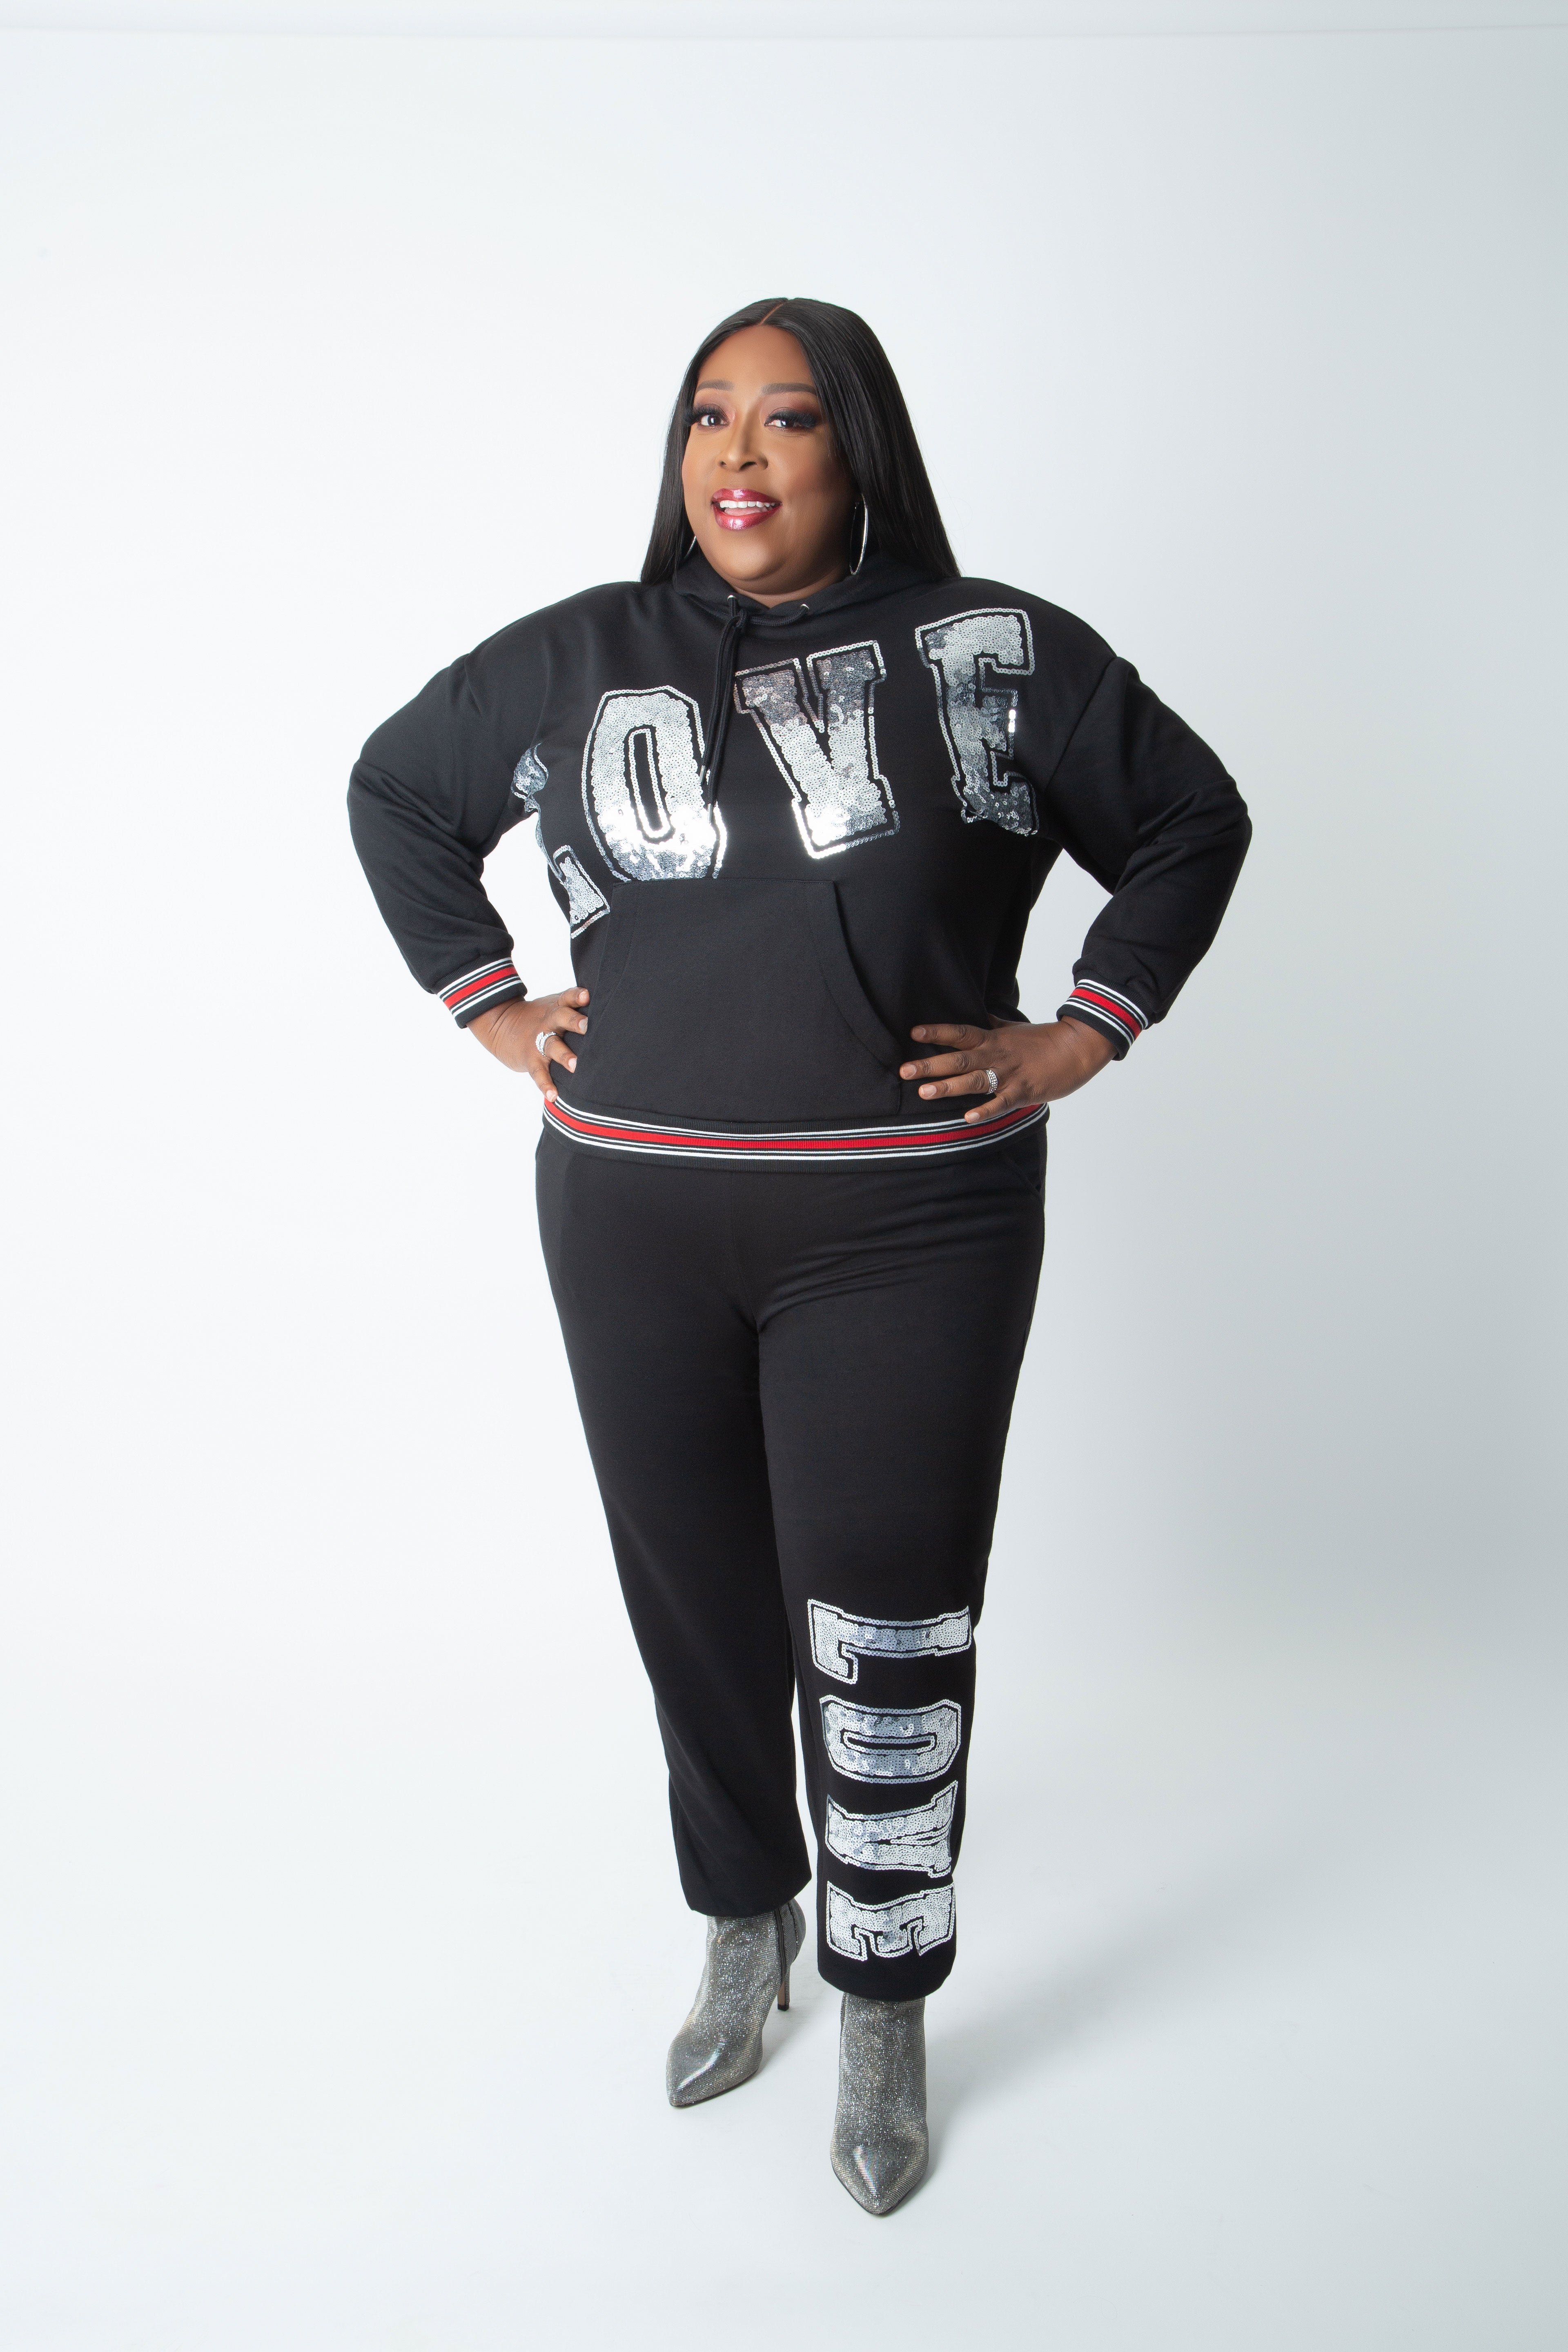 Loni Love Launches First Collection With Ashley Stewart